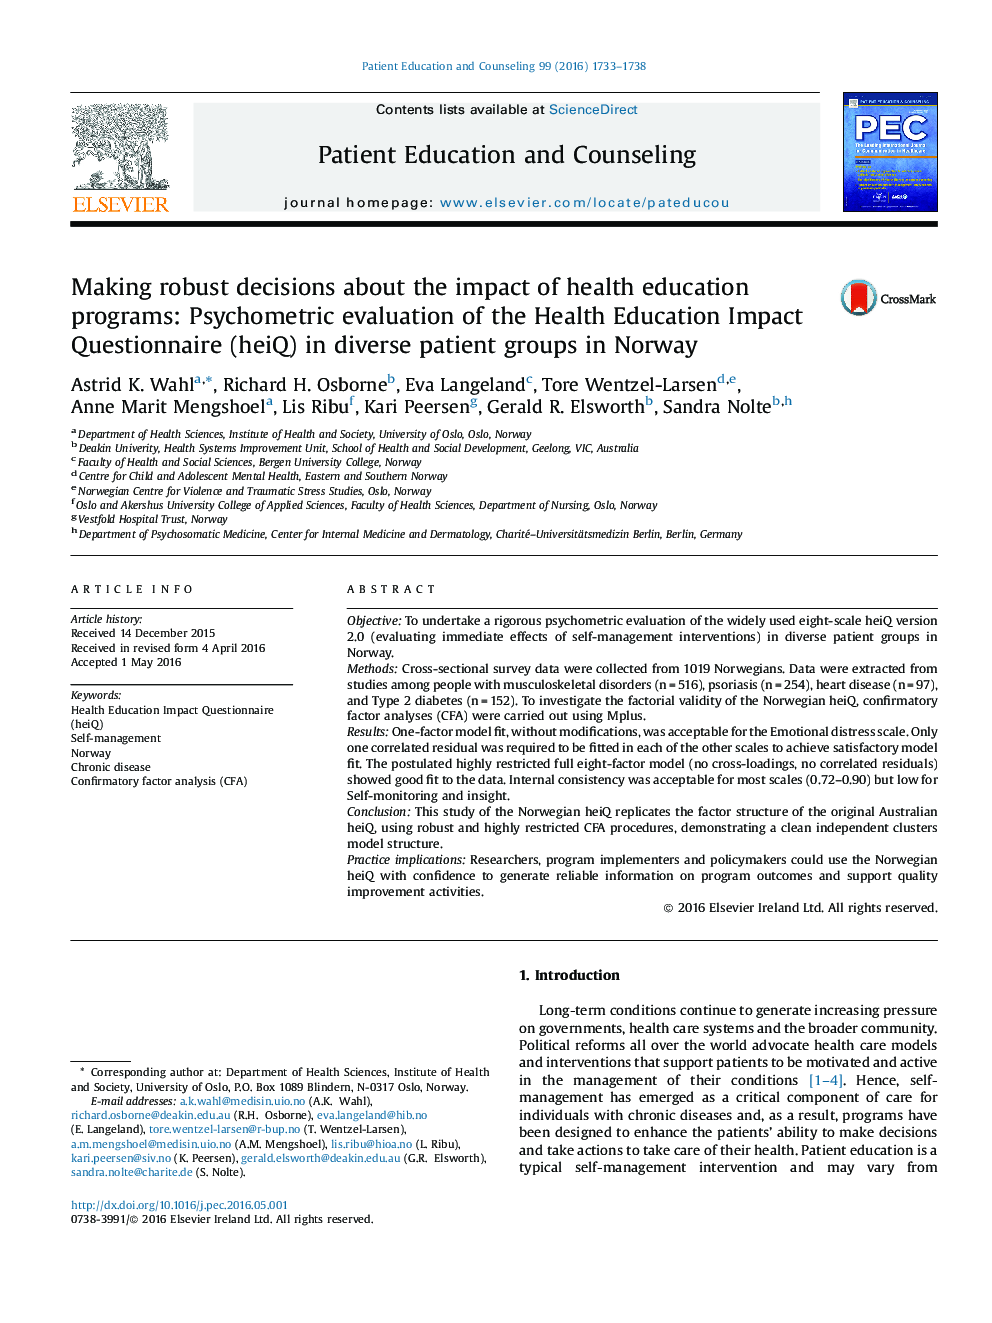 Making robust decisions about the impact of health education programs: Psychometric evaluation of the Health Education Impact Questionnaire (heiQ) in diverse patient groups in Norway